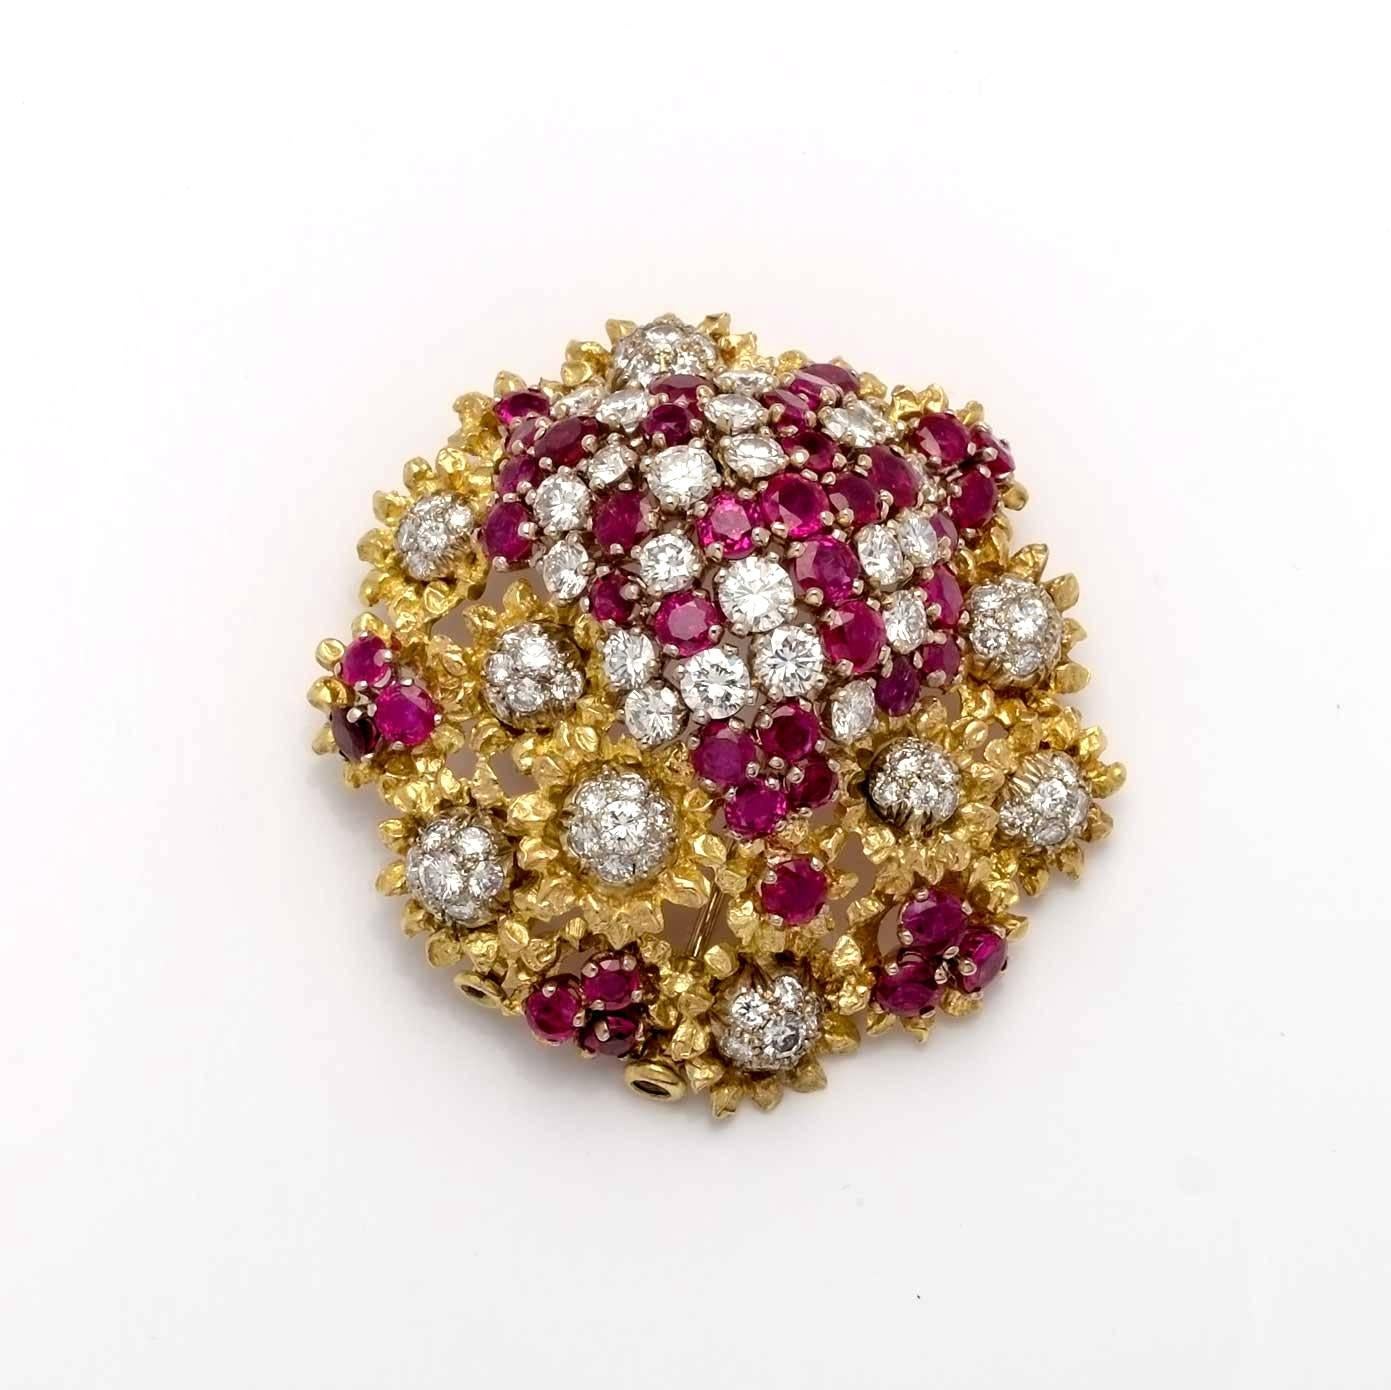 As we would expect from Faraone this brooch boasts the highest quality rubies and diamonds together with an elaborate design typical of the goldsmiths from the era. A real gem that comes with it's original box, it's not the box seen in the picture.